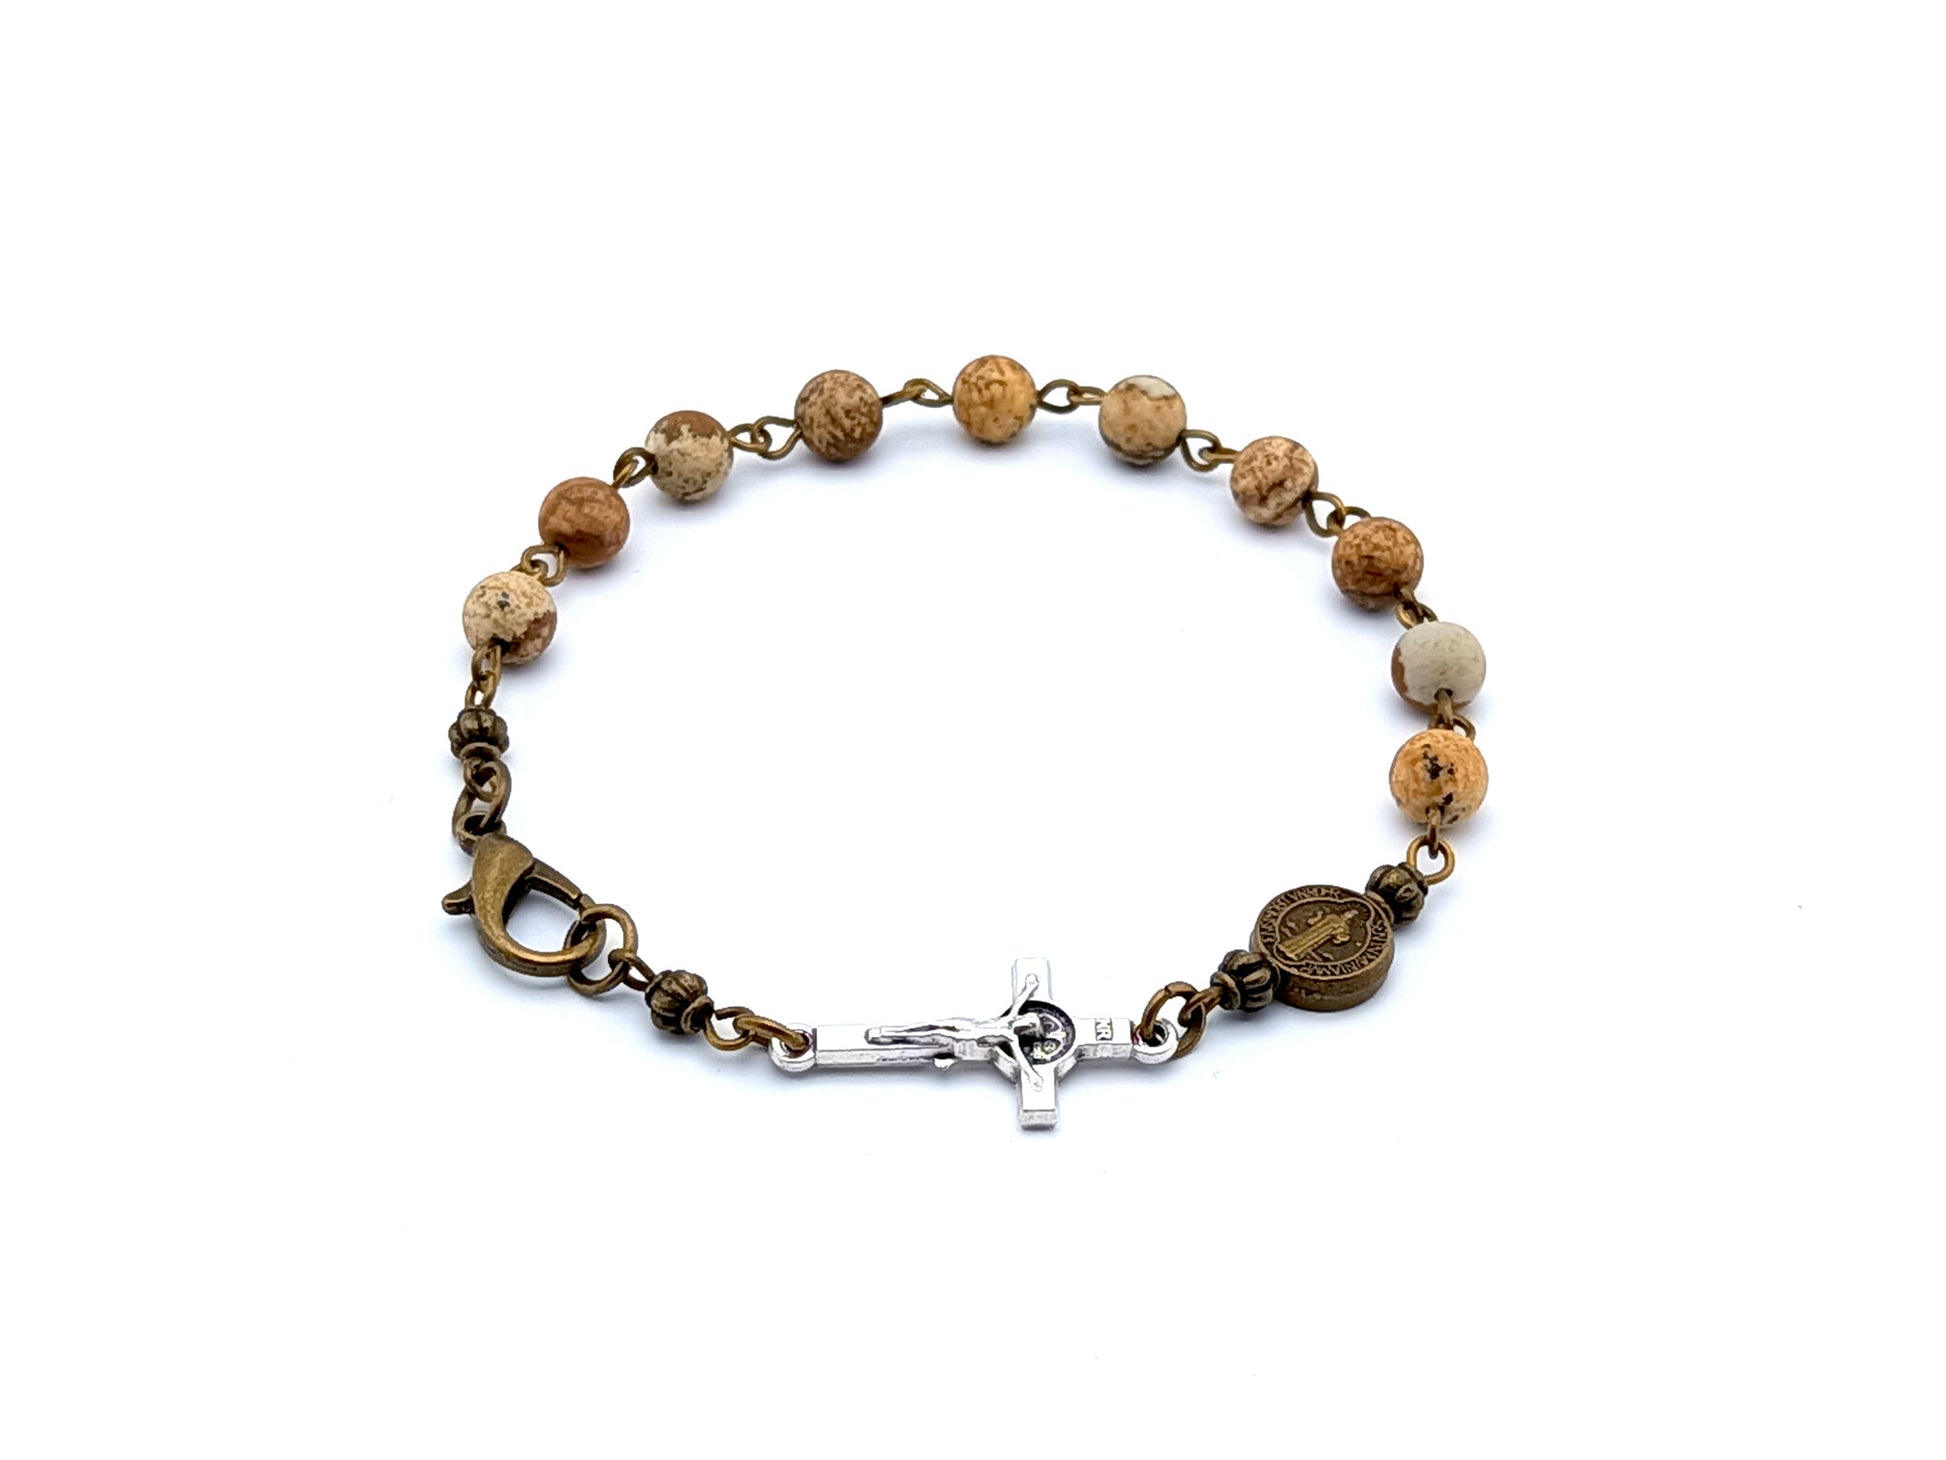 Saint Benedict unique rosary beads single decade rosary bracelet with natural jasper gemstone beads, Saint Benedict linking crucifix and brass lobster clasp and medal.